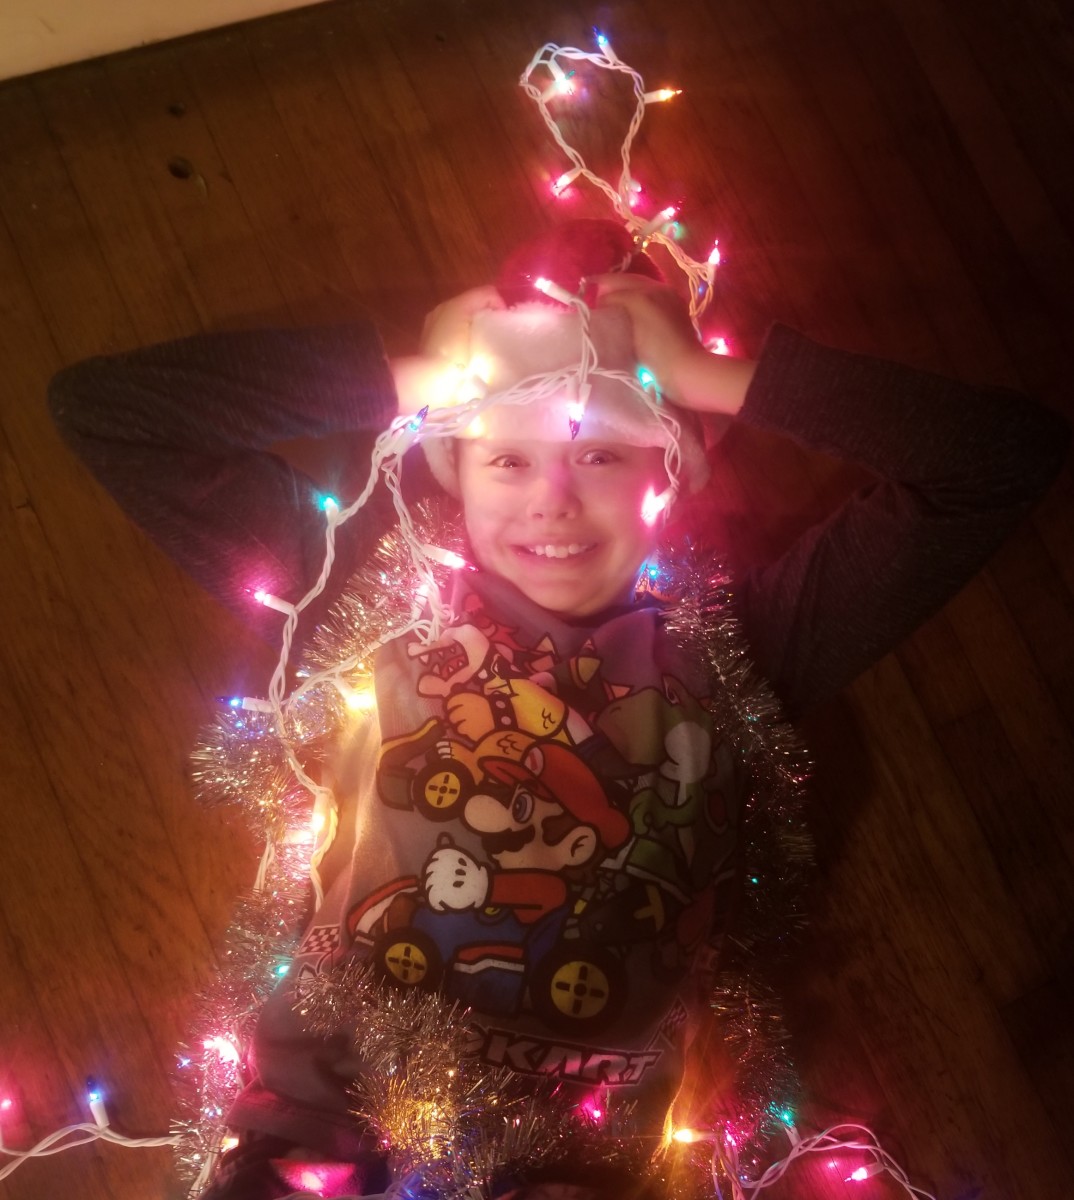 My son loves to decorate for Christmas.